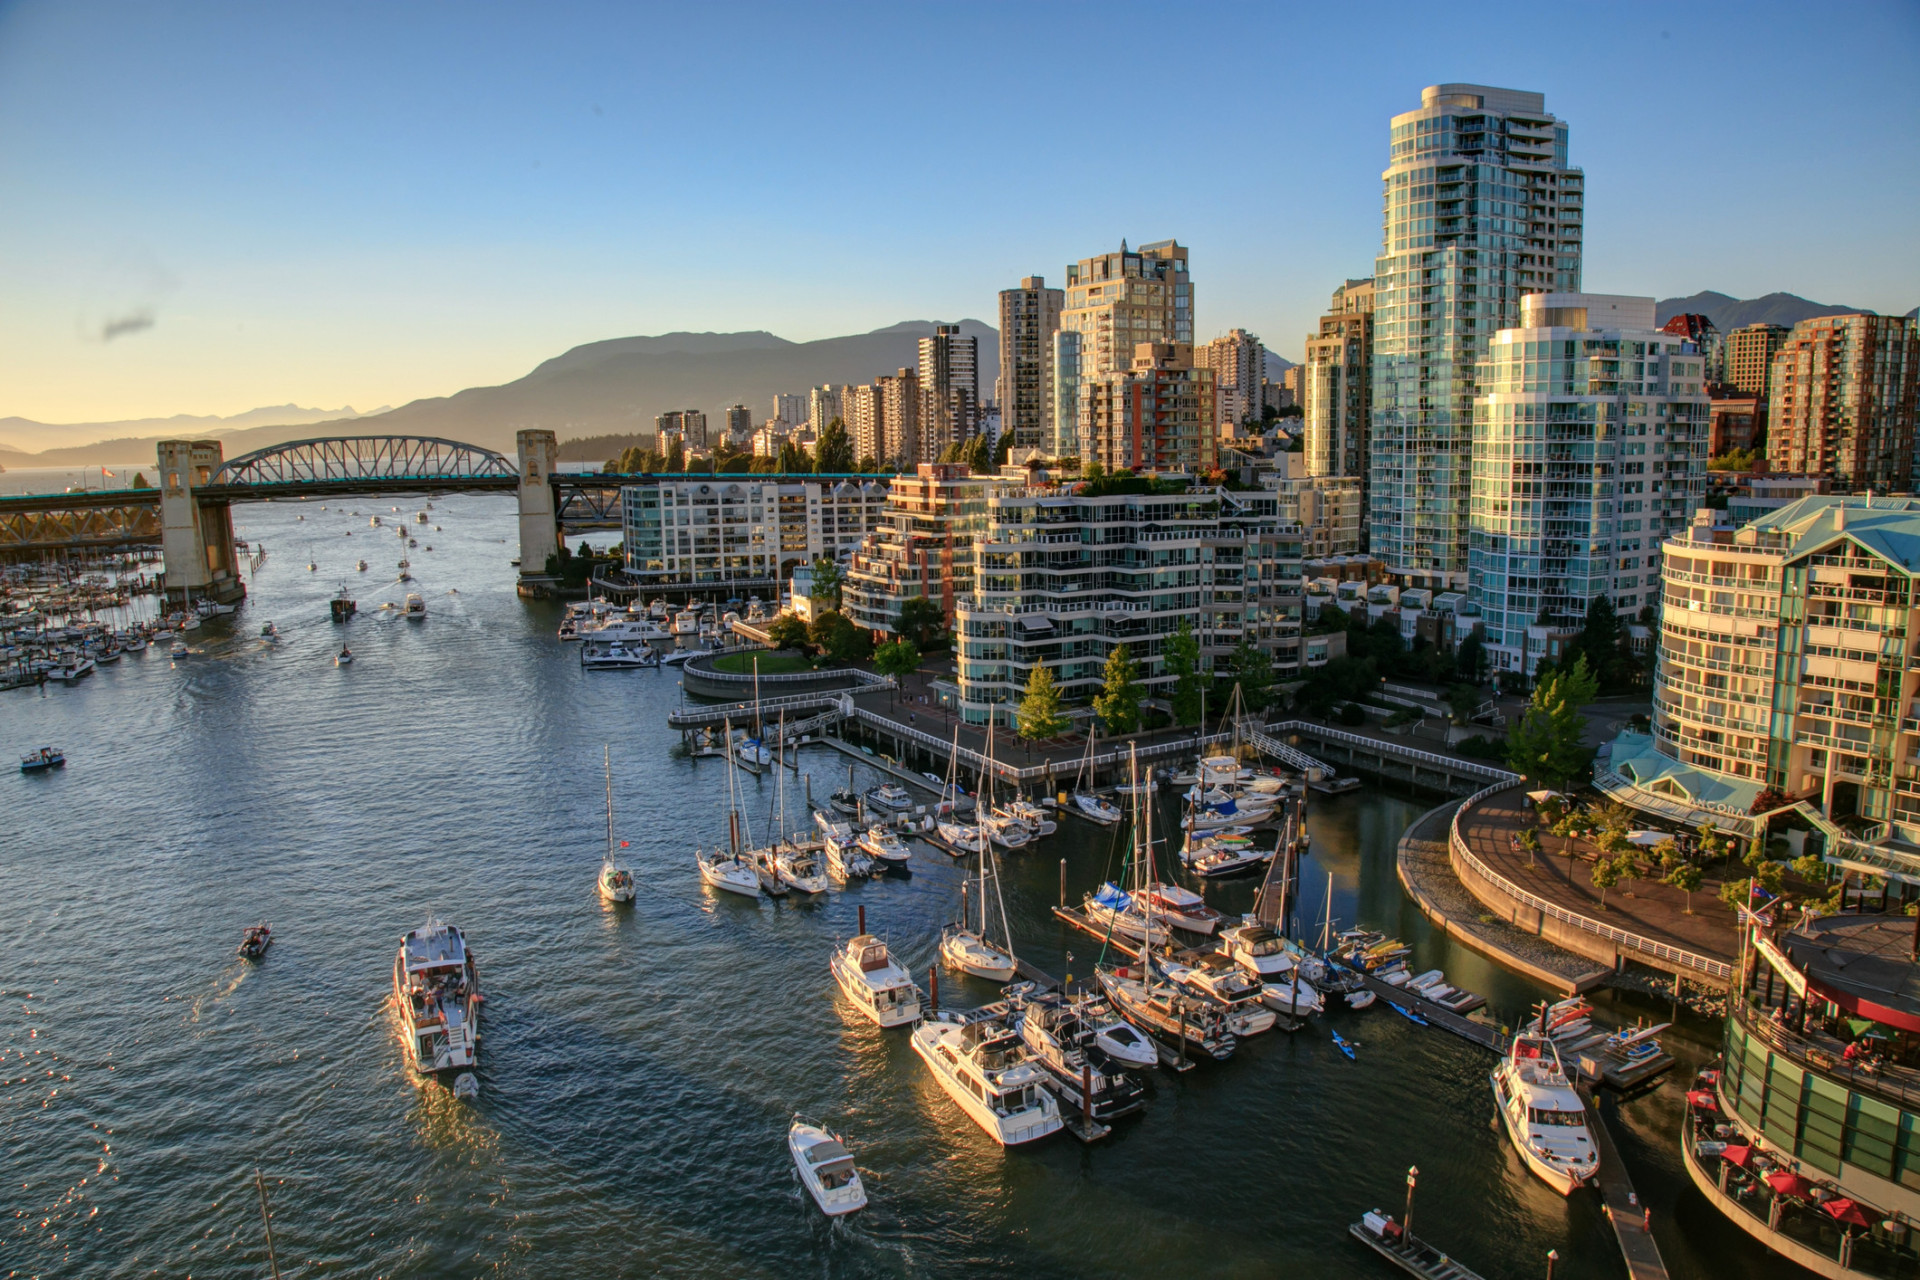 Nestled between ocean and mountains, the urban but laid-back vibe of Vancouver is invigorating enough to make you forget you've been in a car for the past week.<p>You may also like:<a href="https://www.starsinsider.com/n/467863?utm_source=msn.com&utm_medium=display&utm_campaign=referral_description&utm_content=384585v6en-us"> Log cabins you'll want to move into</a></p>